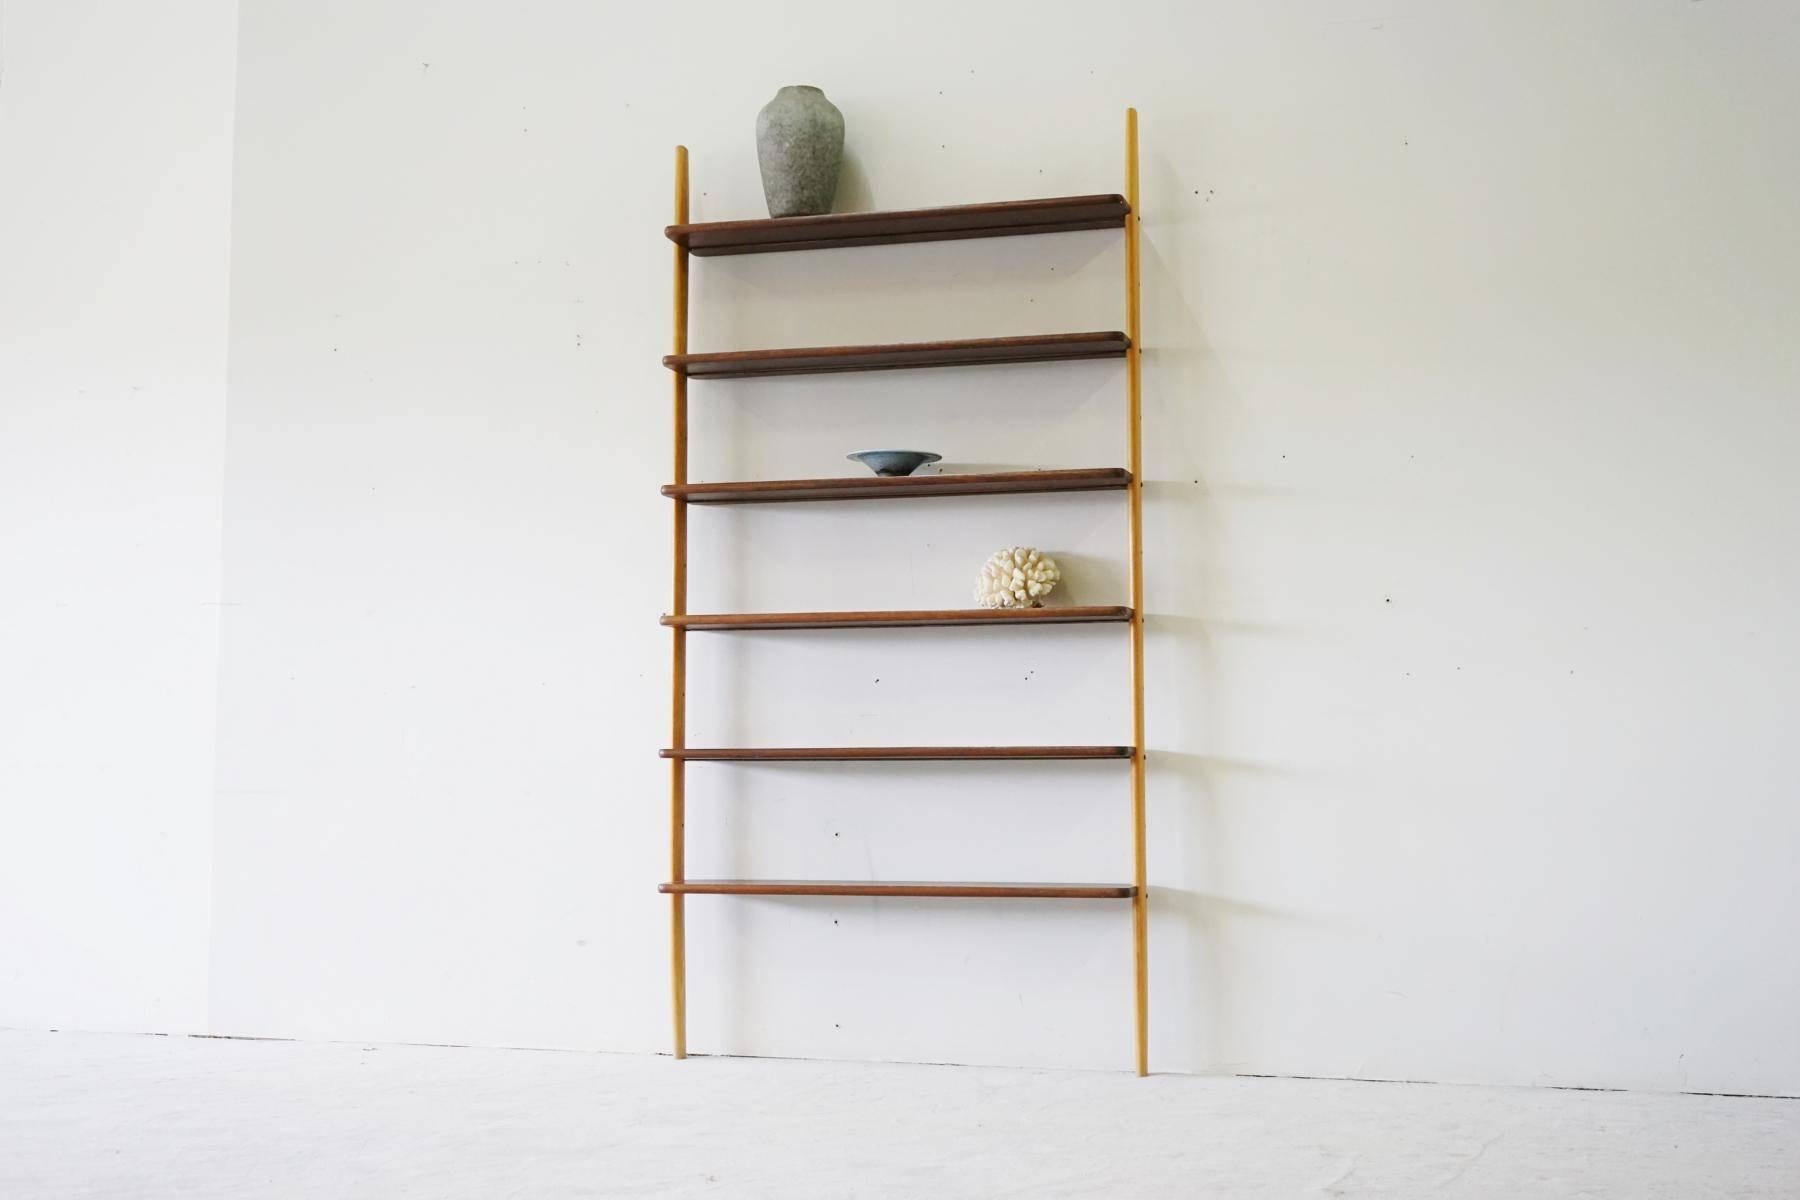 Rare midcentury teak wall unit shelf system, 1960s
The condition is good, the shelves are straight and the processing is excellent.
The rare shelf is very beautifully built and processed. It fits well into the living and office area.
 